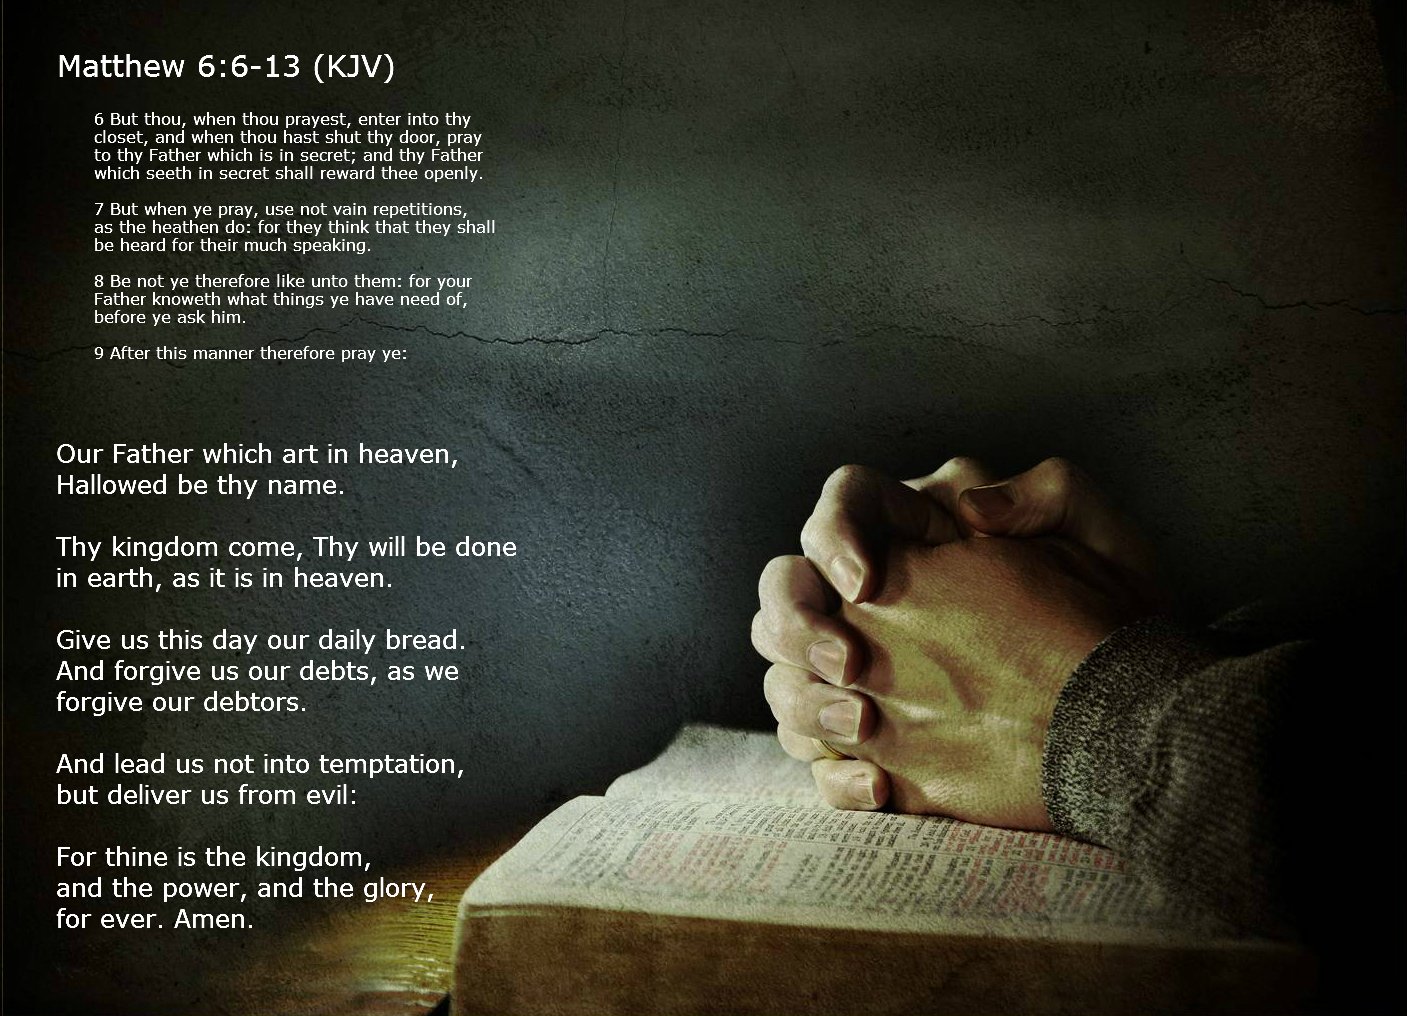 there are 7 petitions in the lord s prayer which the lord has taught